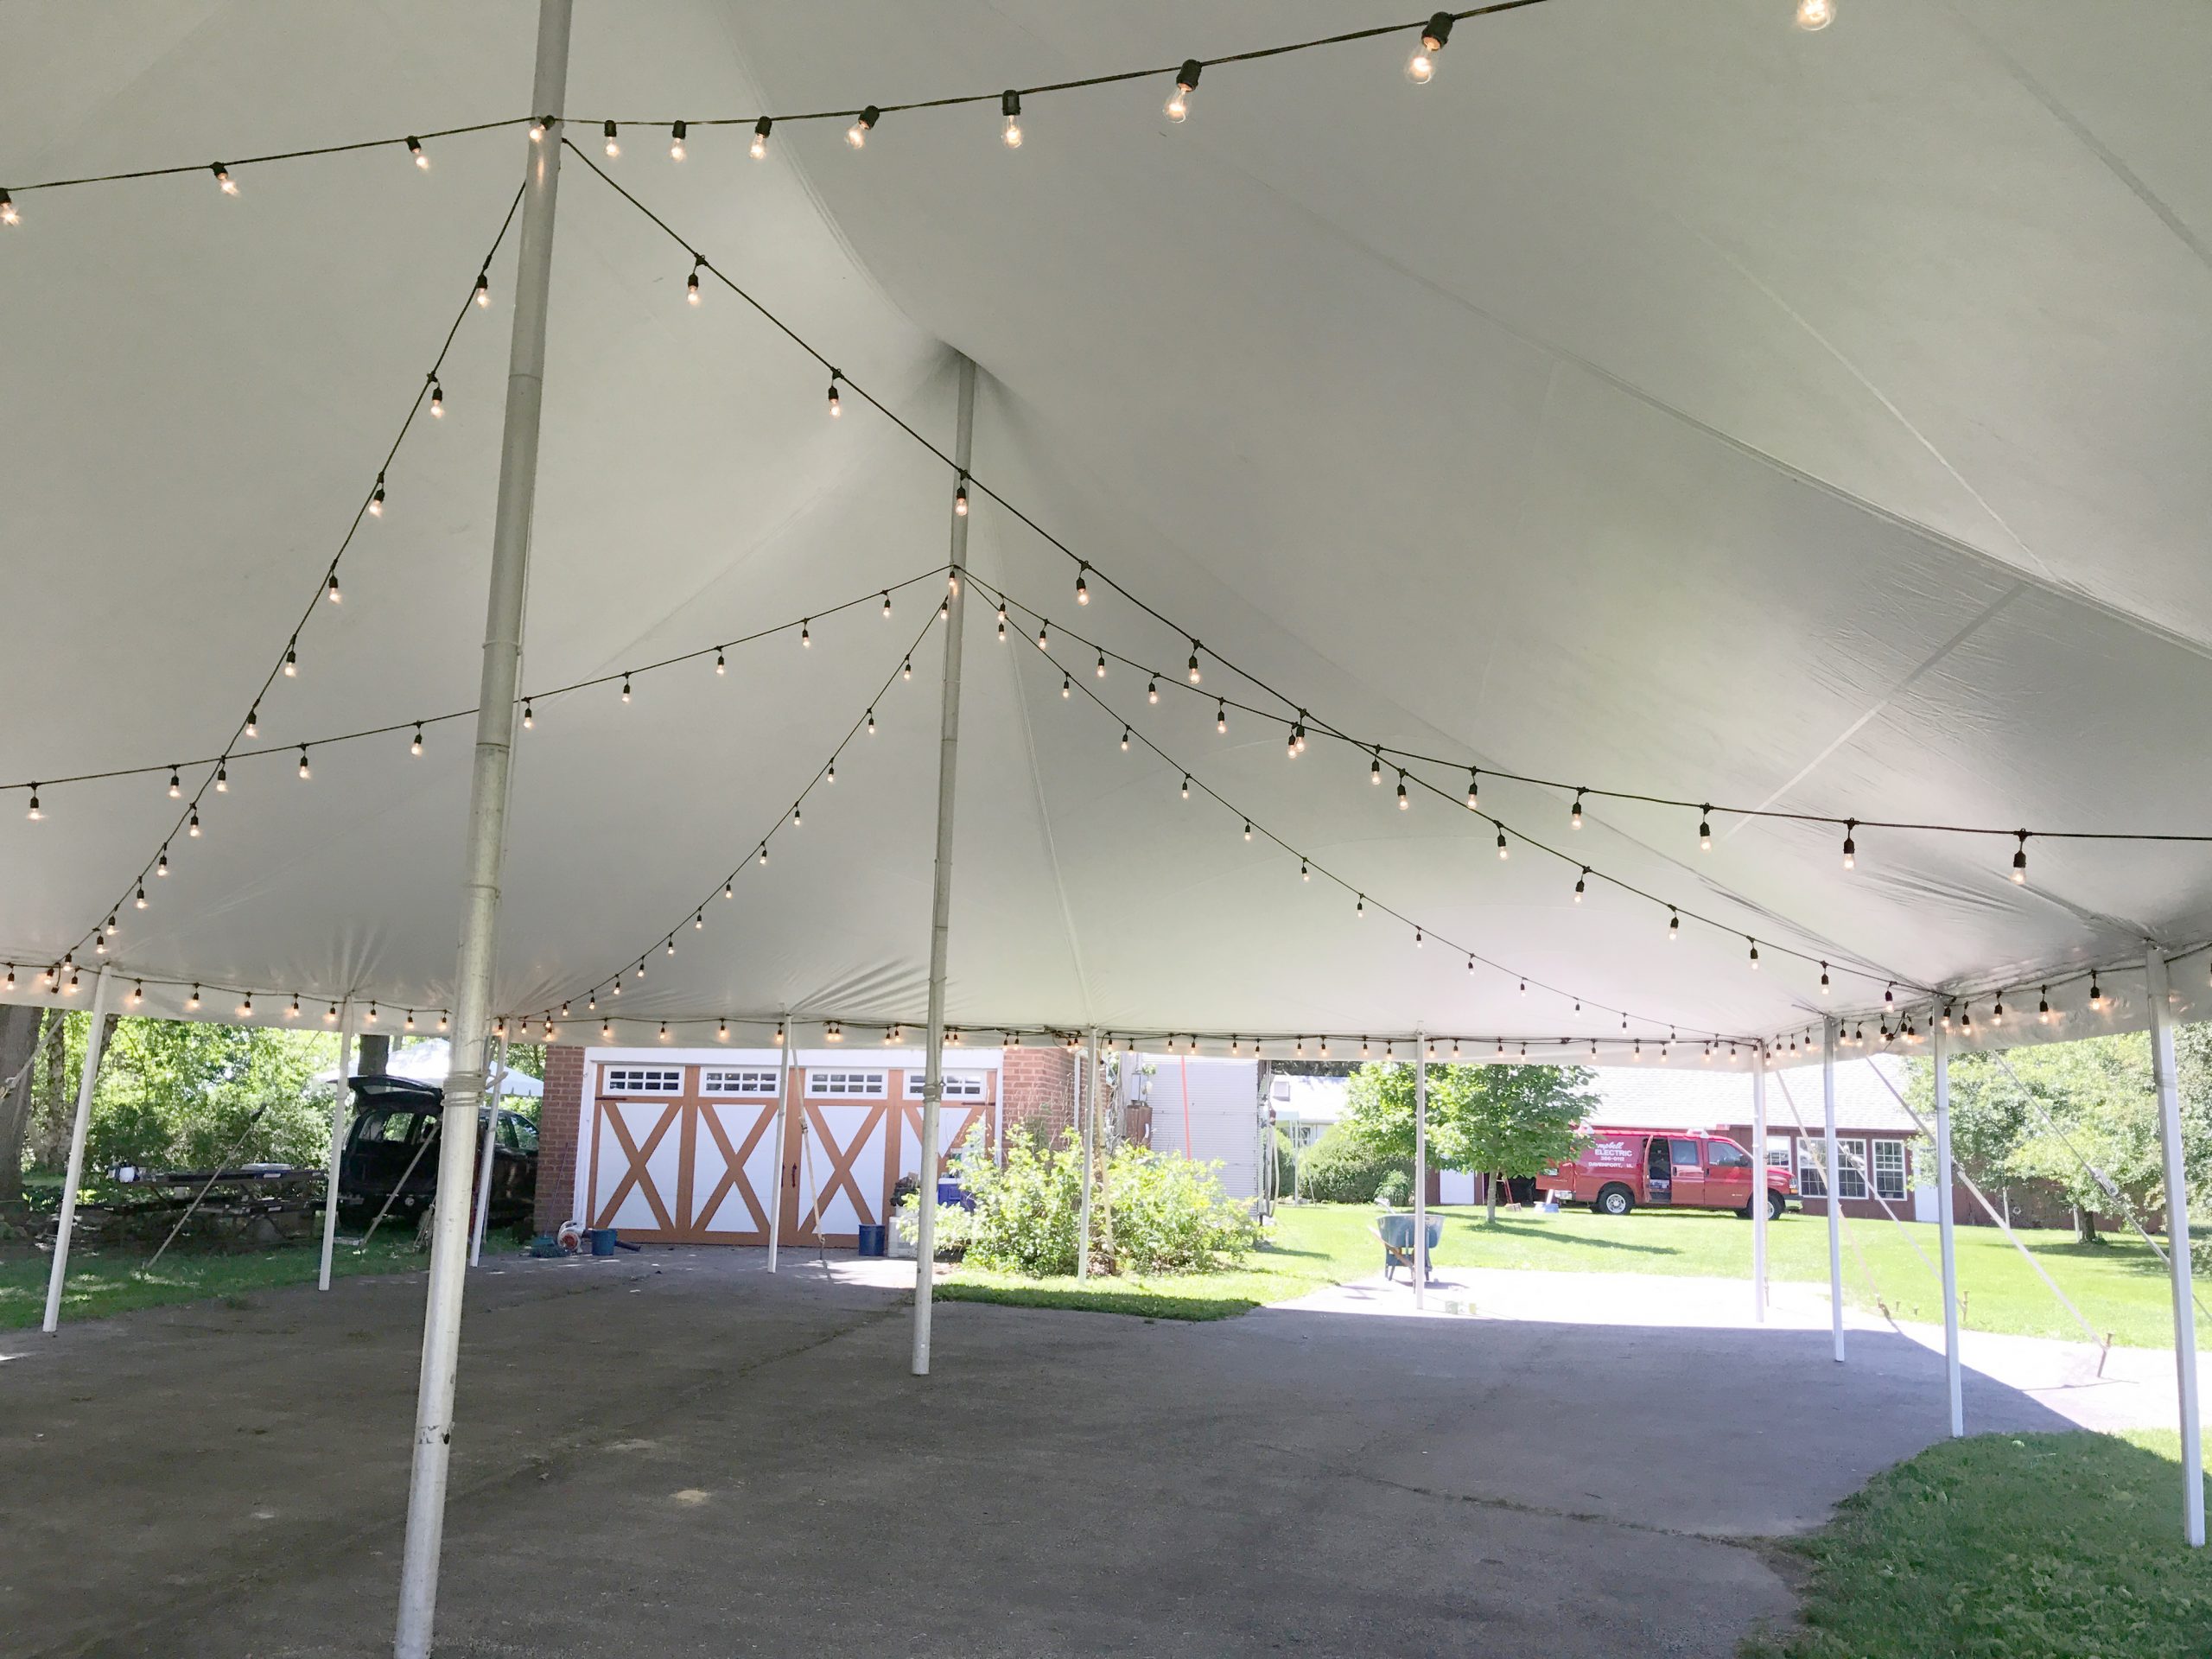 Under the 40' x 60' rope and pole wedding tent in Walcott, IA